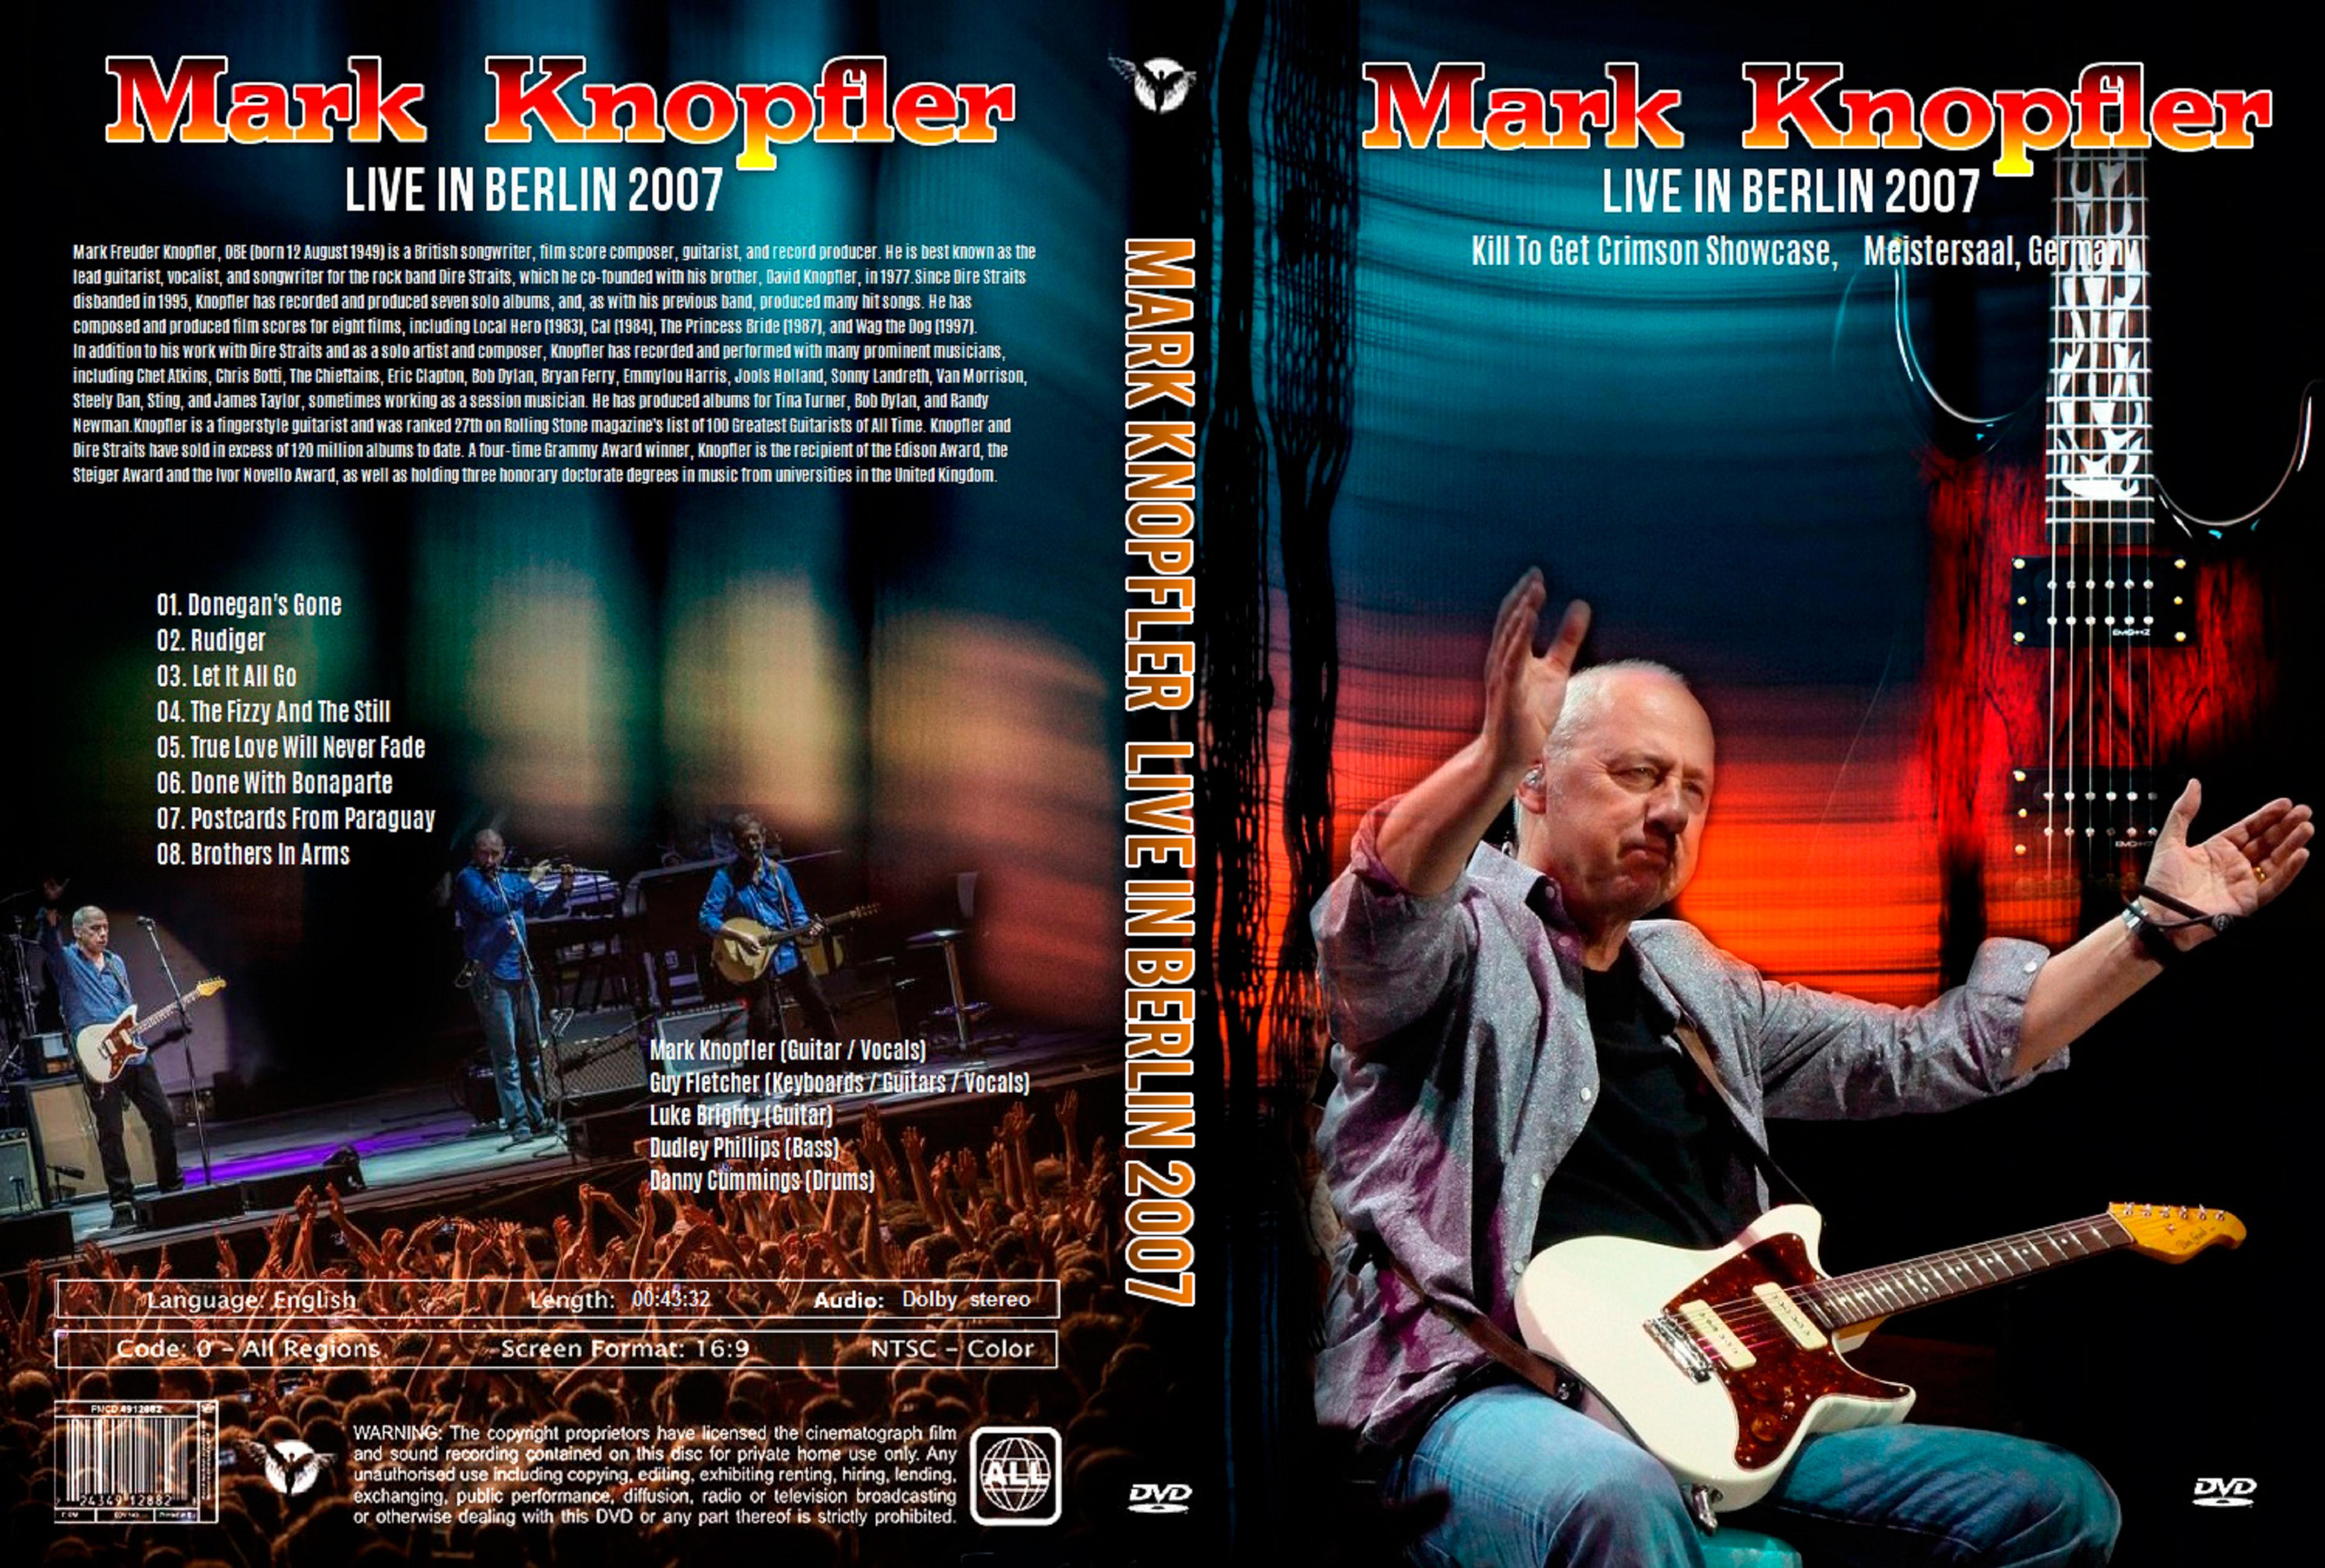 Mark Knopfler - Brothers In Arms (Berlin 2007